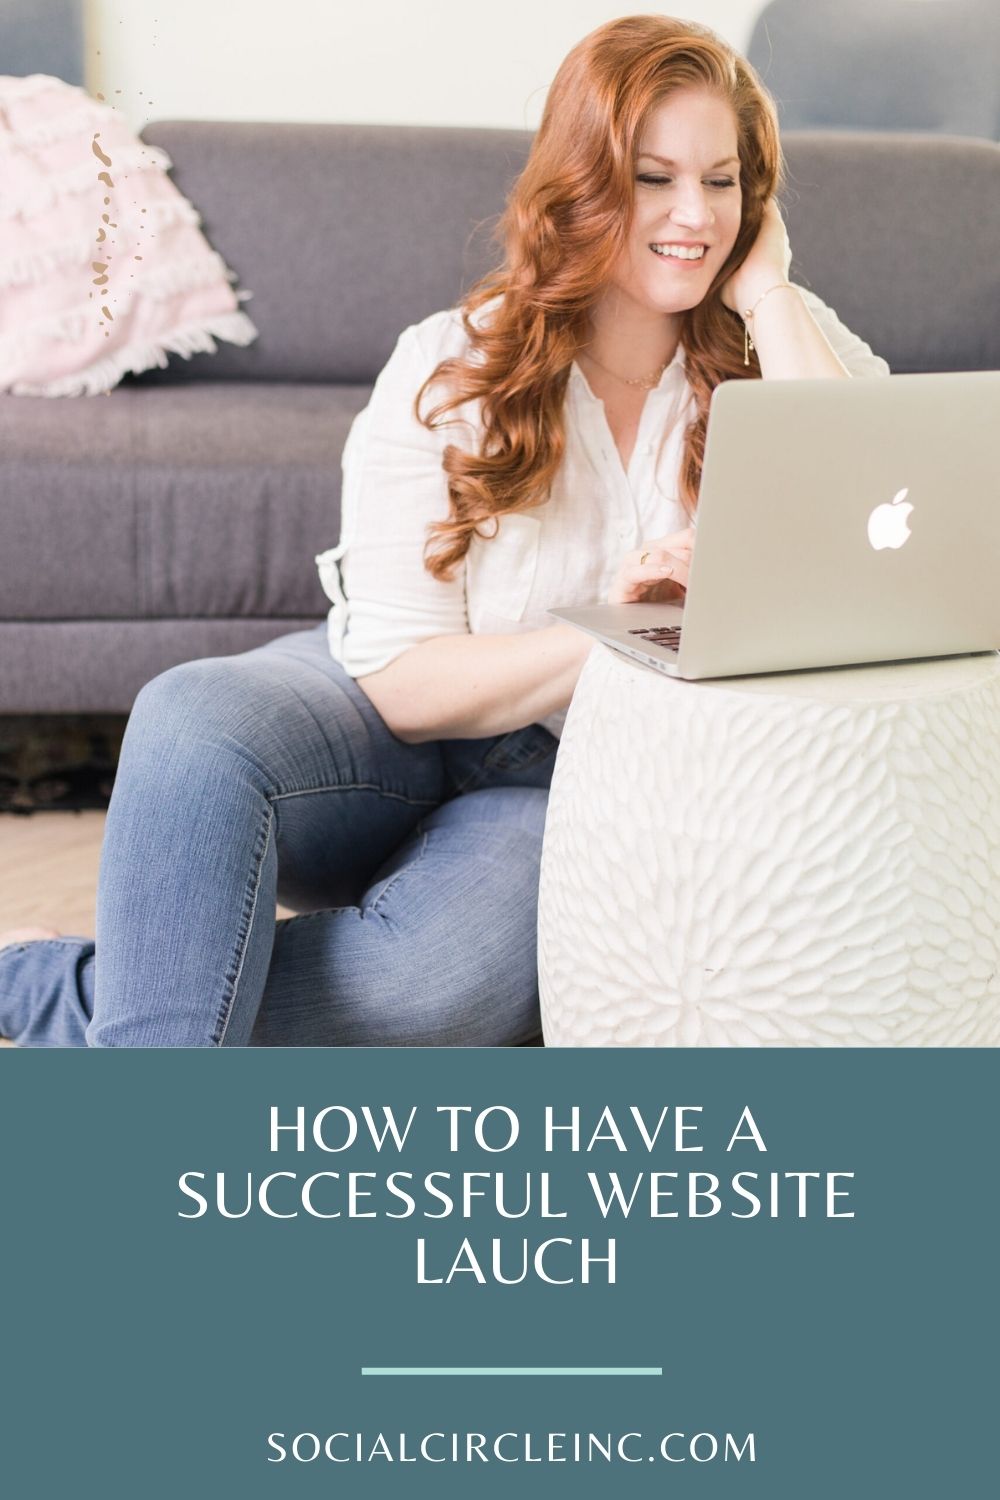 How to Have a Successful Website Launch